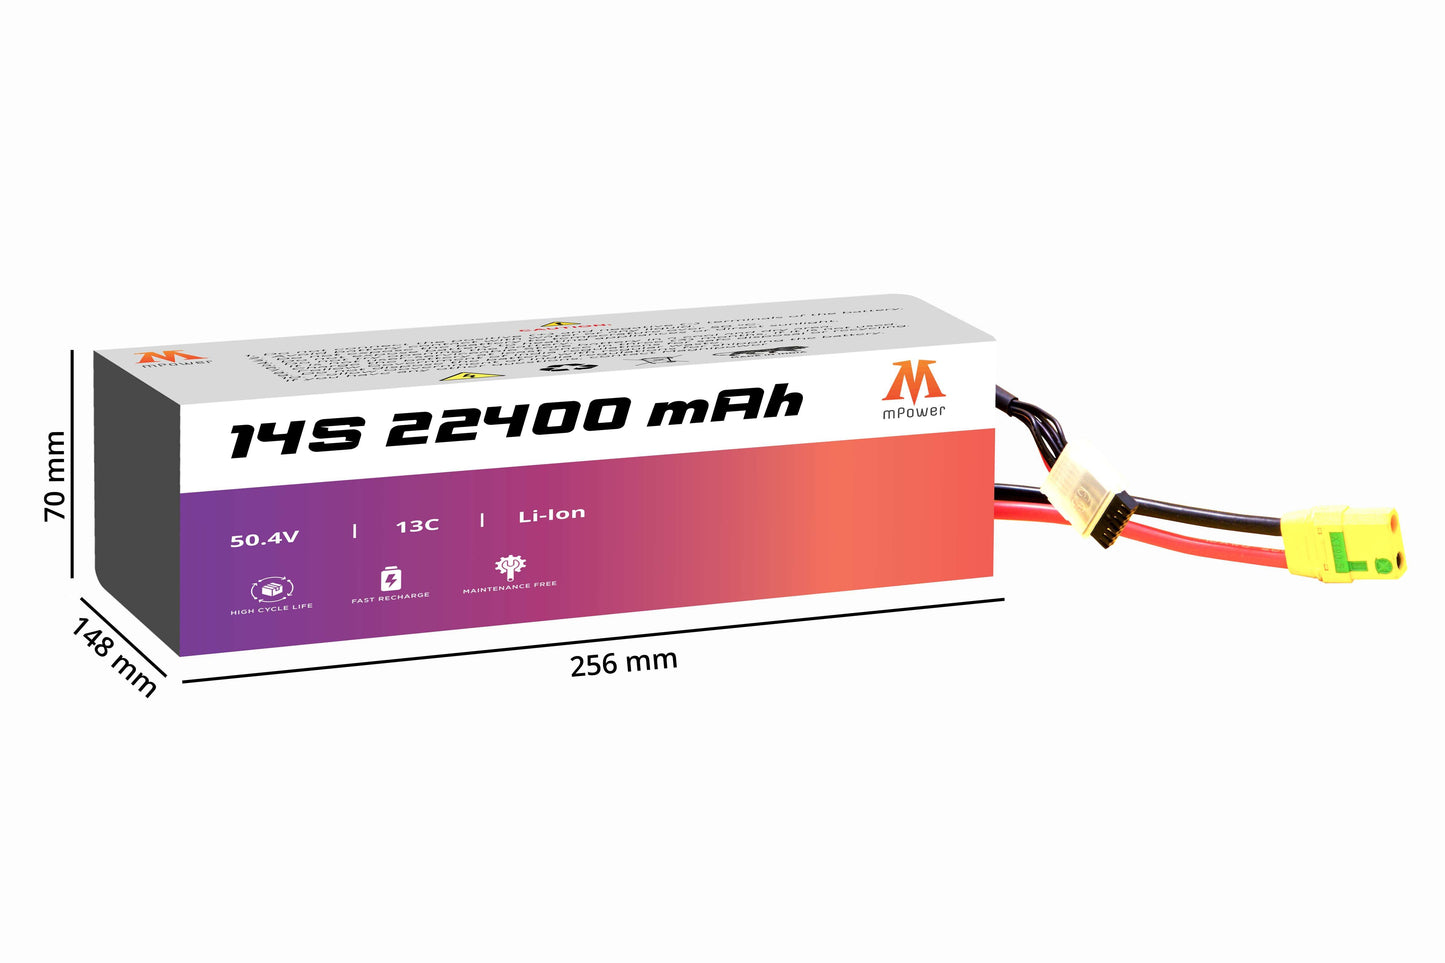 mPower 14S 22400mAh Lithium-Ion Battery for Survey Drones